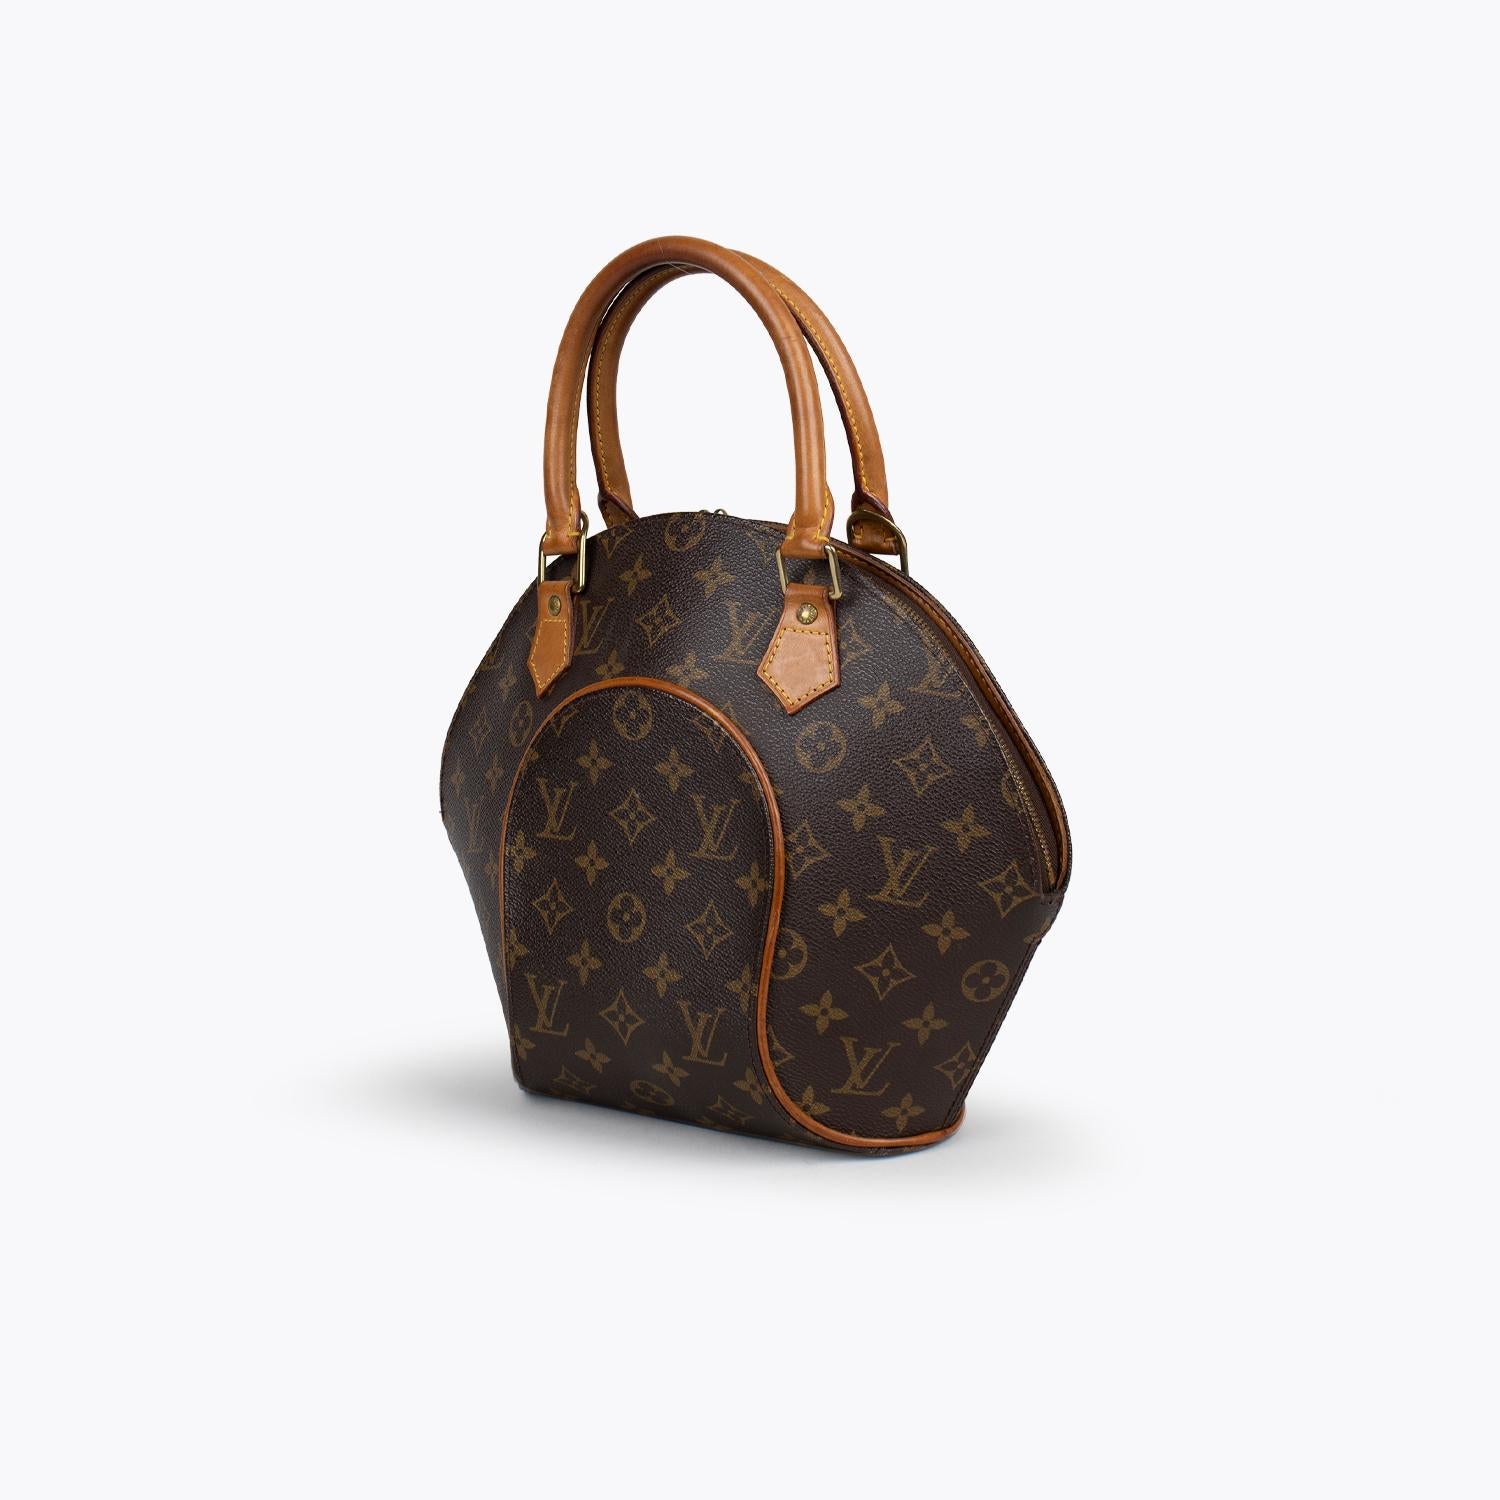 Chocolate and tan monogram coated canvas Louis Vuitton Ellipse PM handle bag with

– Brass hardware
– Dual rolled leather top handles
– Tan vachetta leather trim, tonal canvas lining, single slit pocket at interior wall and zip closure at